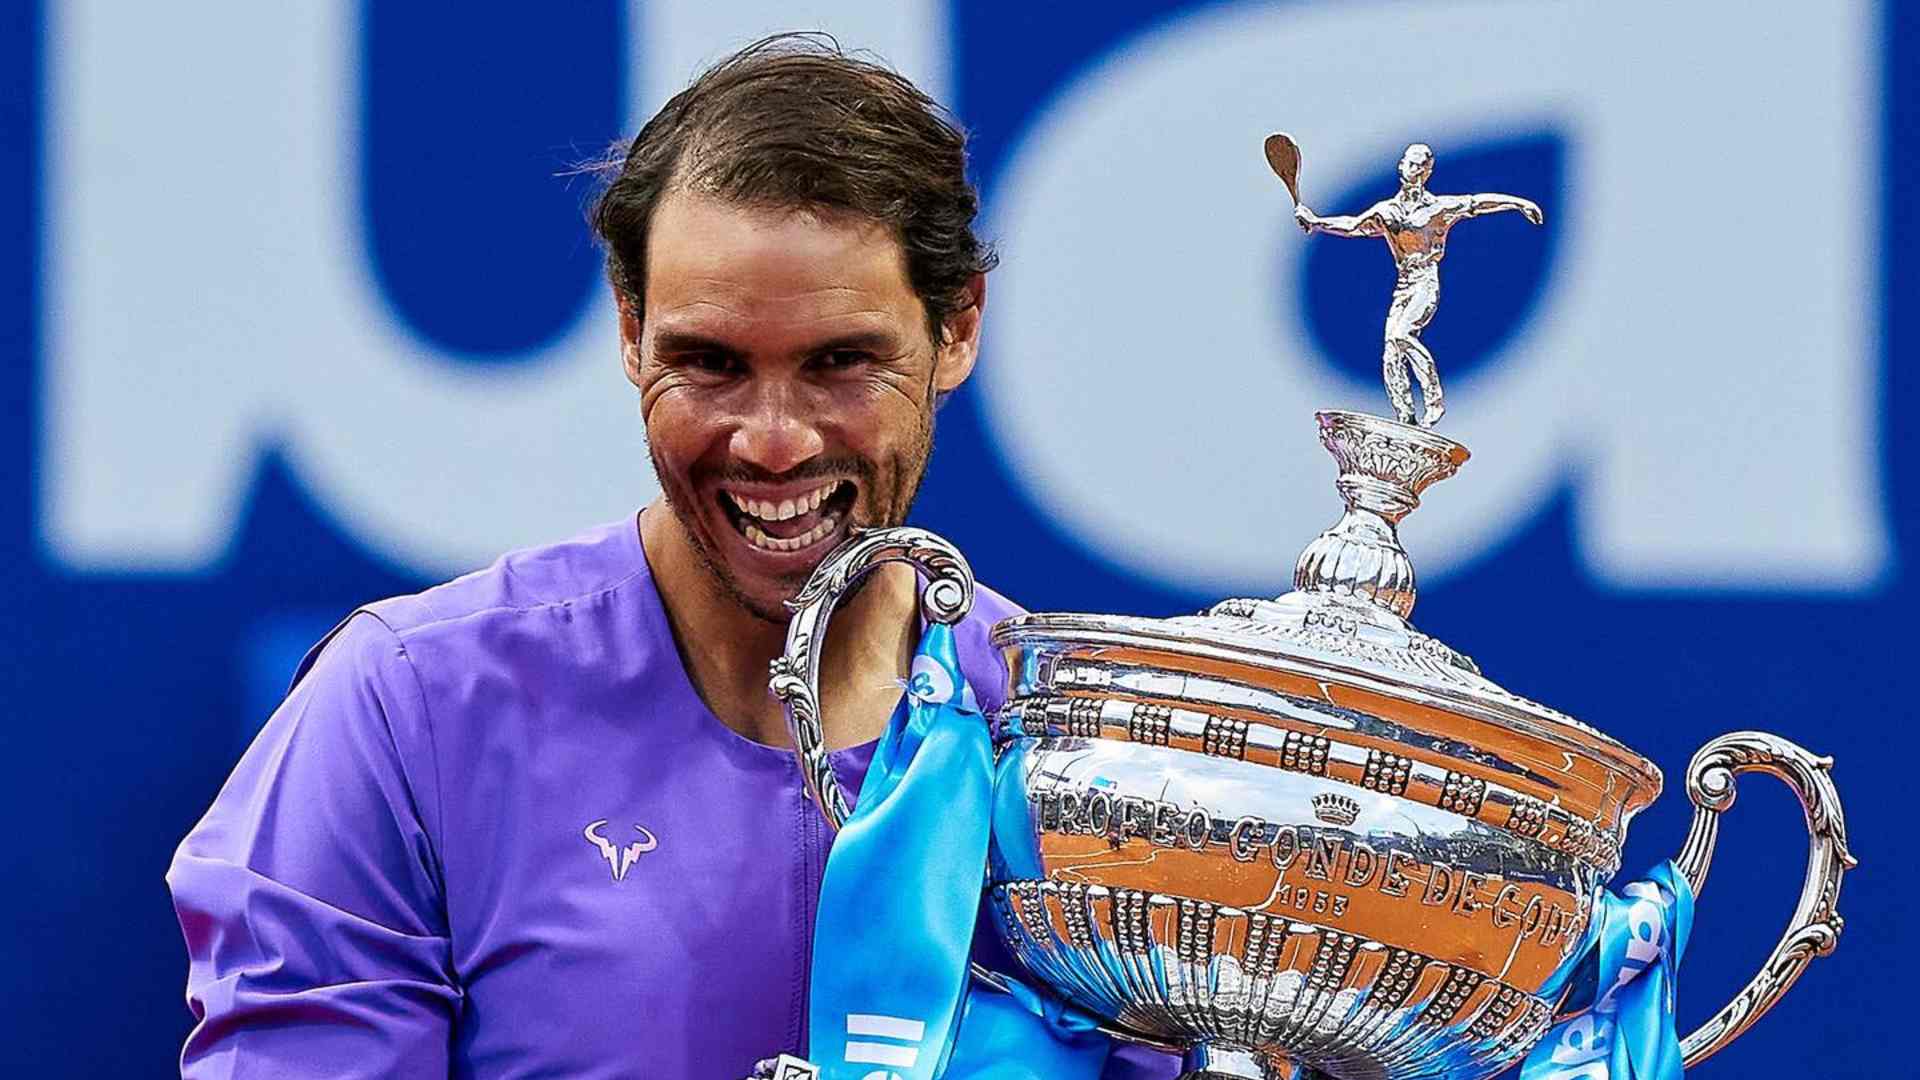 Rafael Nadal with the Barcelona open title, Image credit: Facebook/Barcelona Open